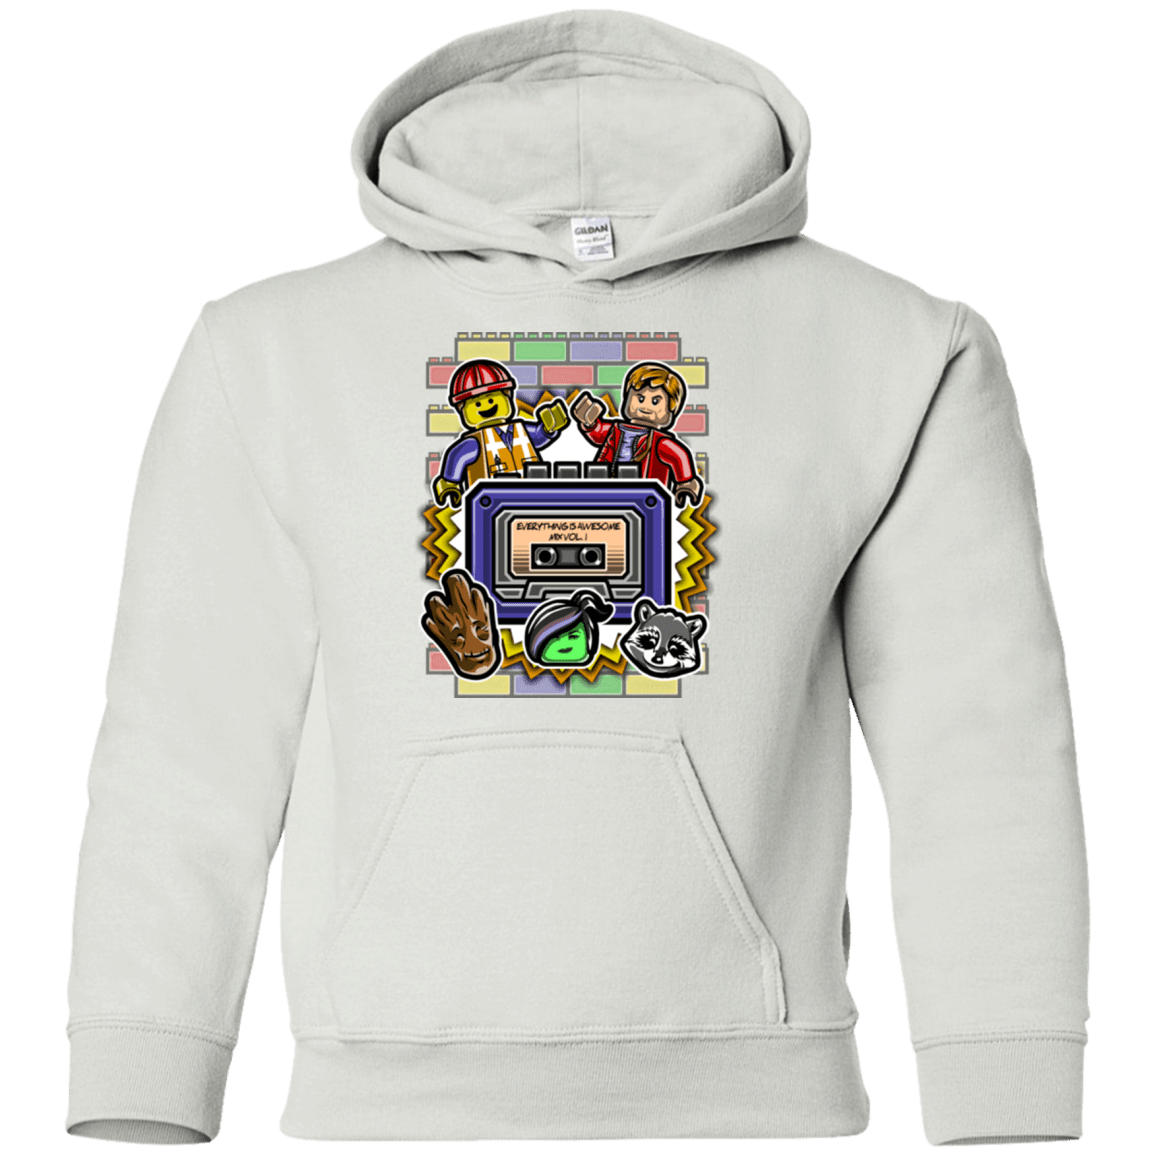 Sweatshirts White / YS Everything is awesome mix Youth Hoodie